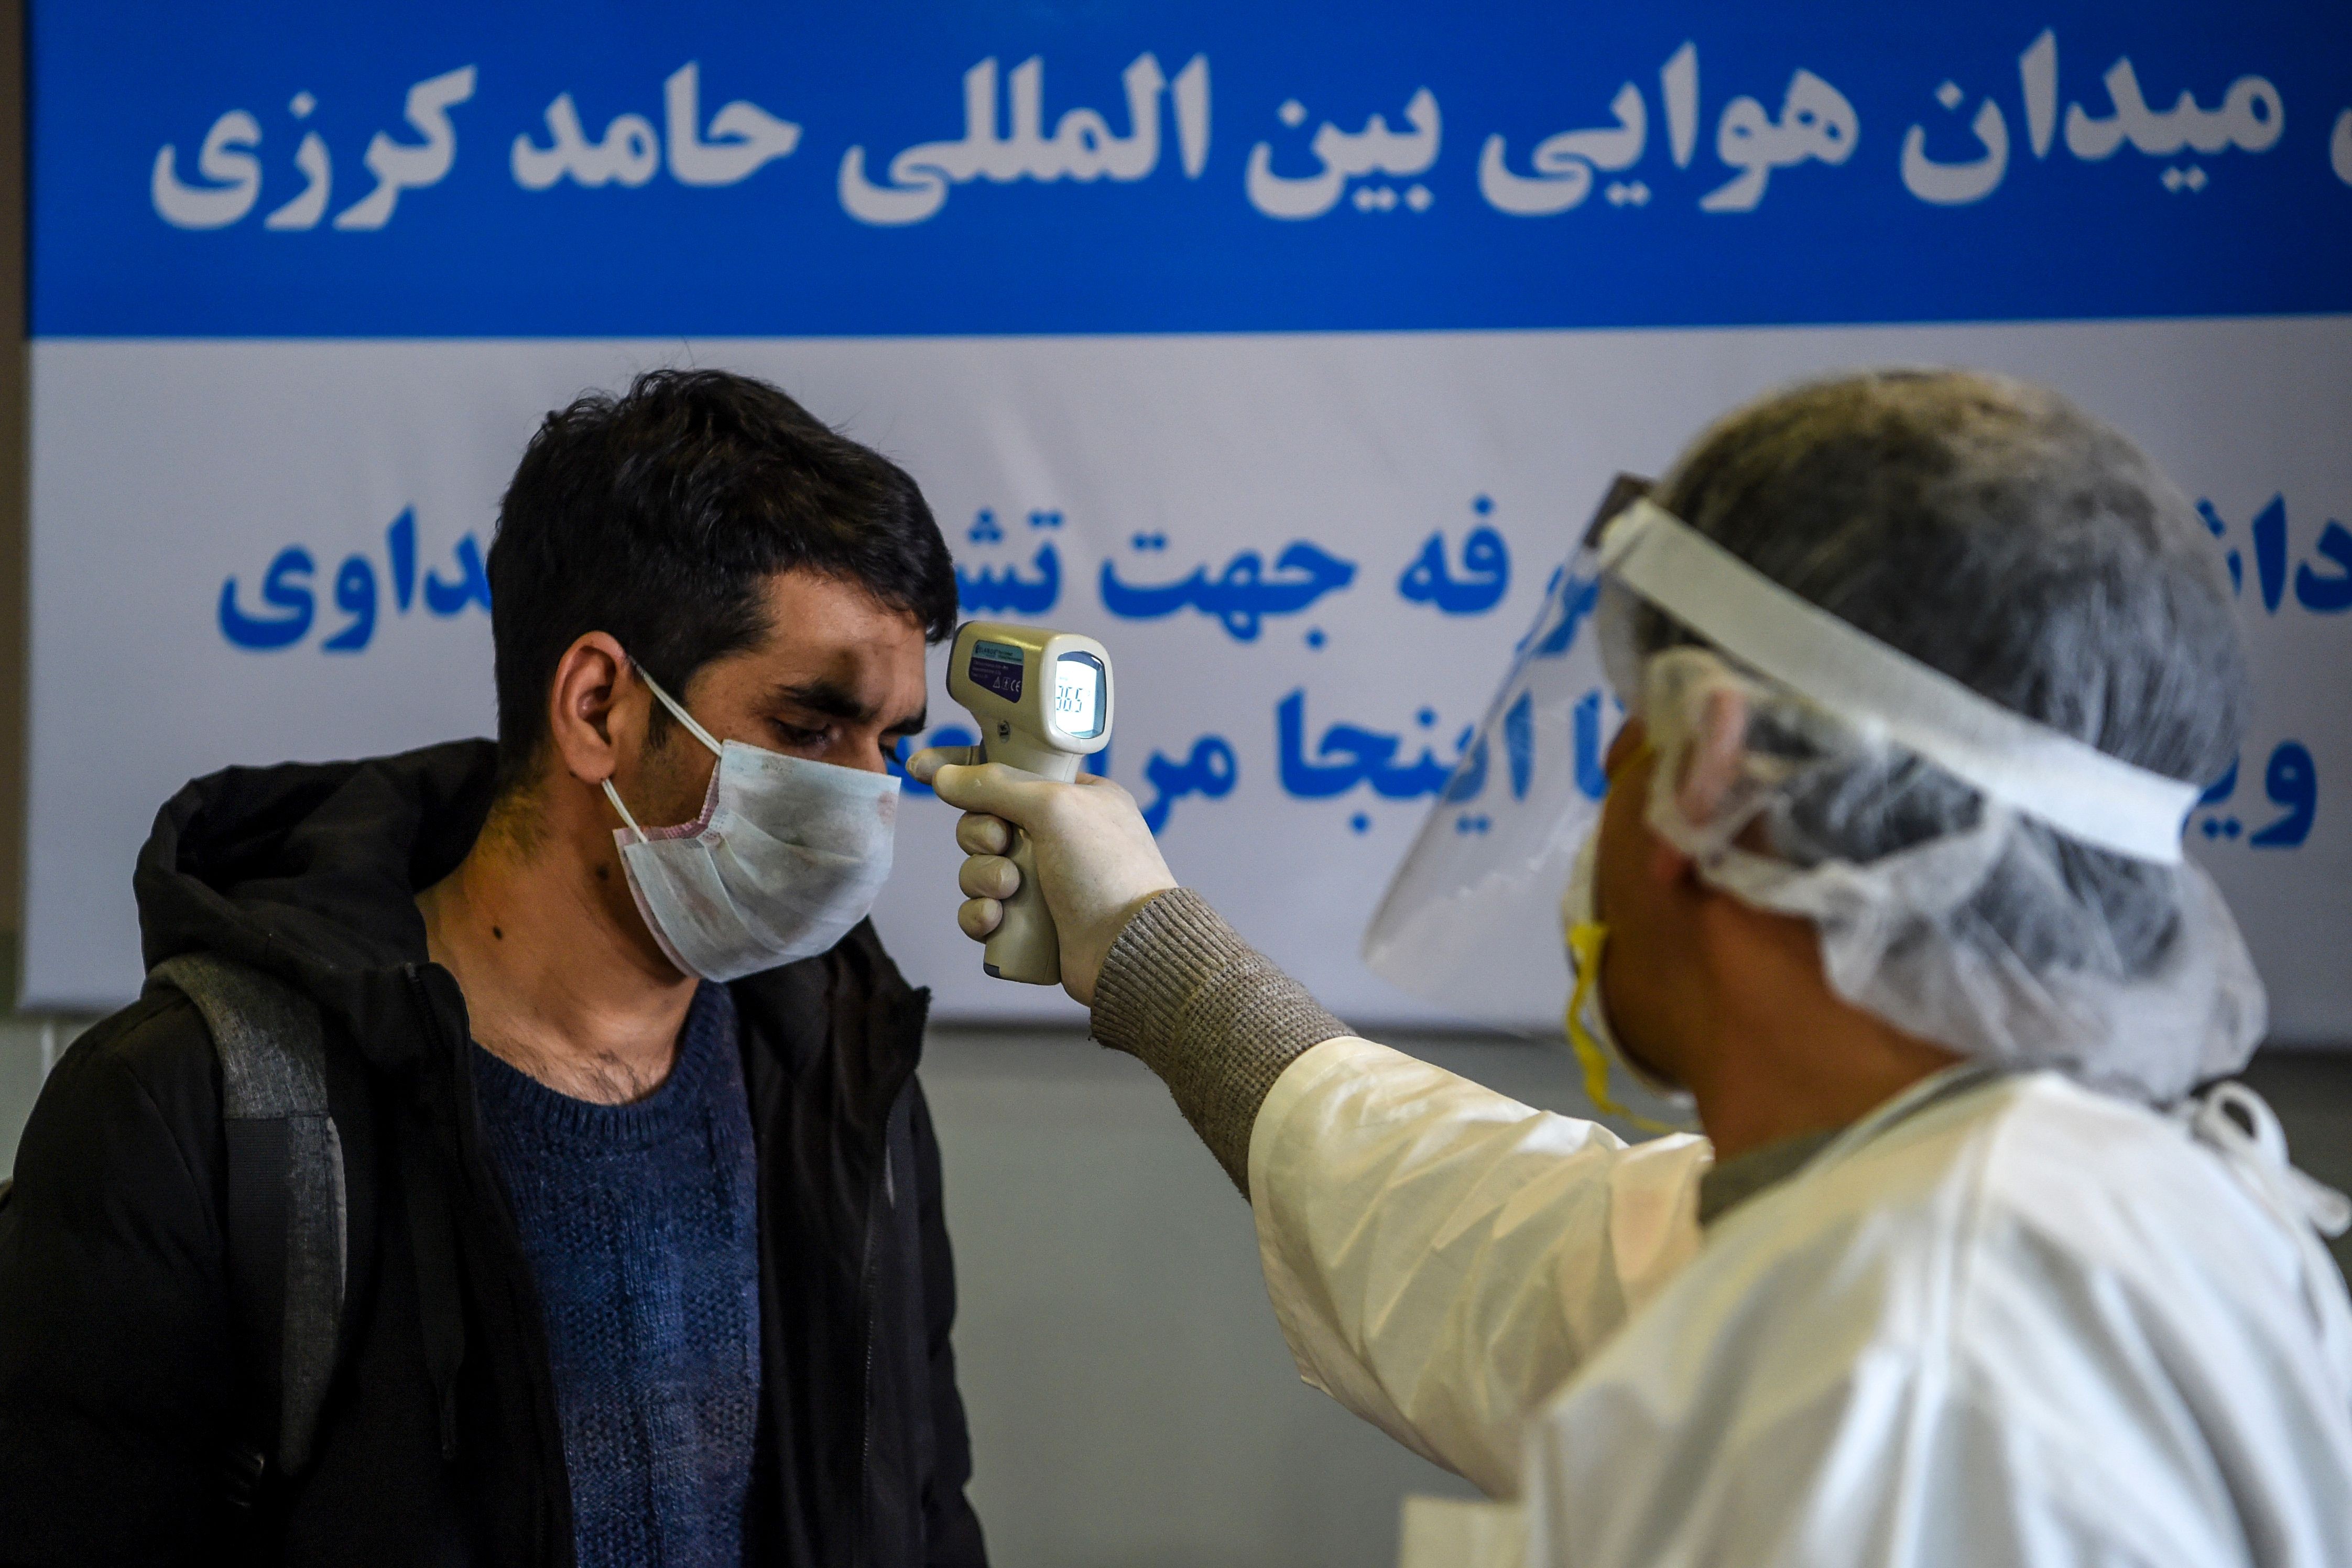 A health worker wearing protective gear checks a passenger’s temperature at Hamid Karzai International Airport in Kabul earlier this month. Photo: AFP